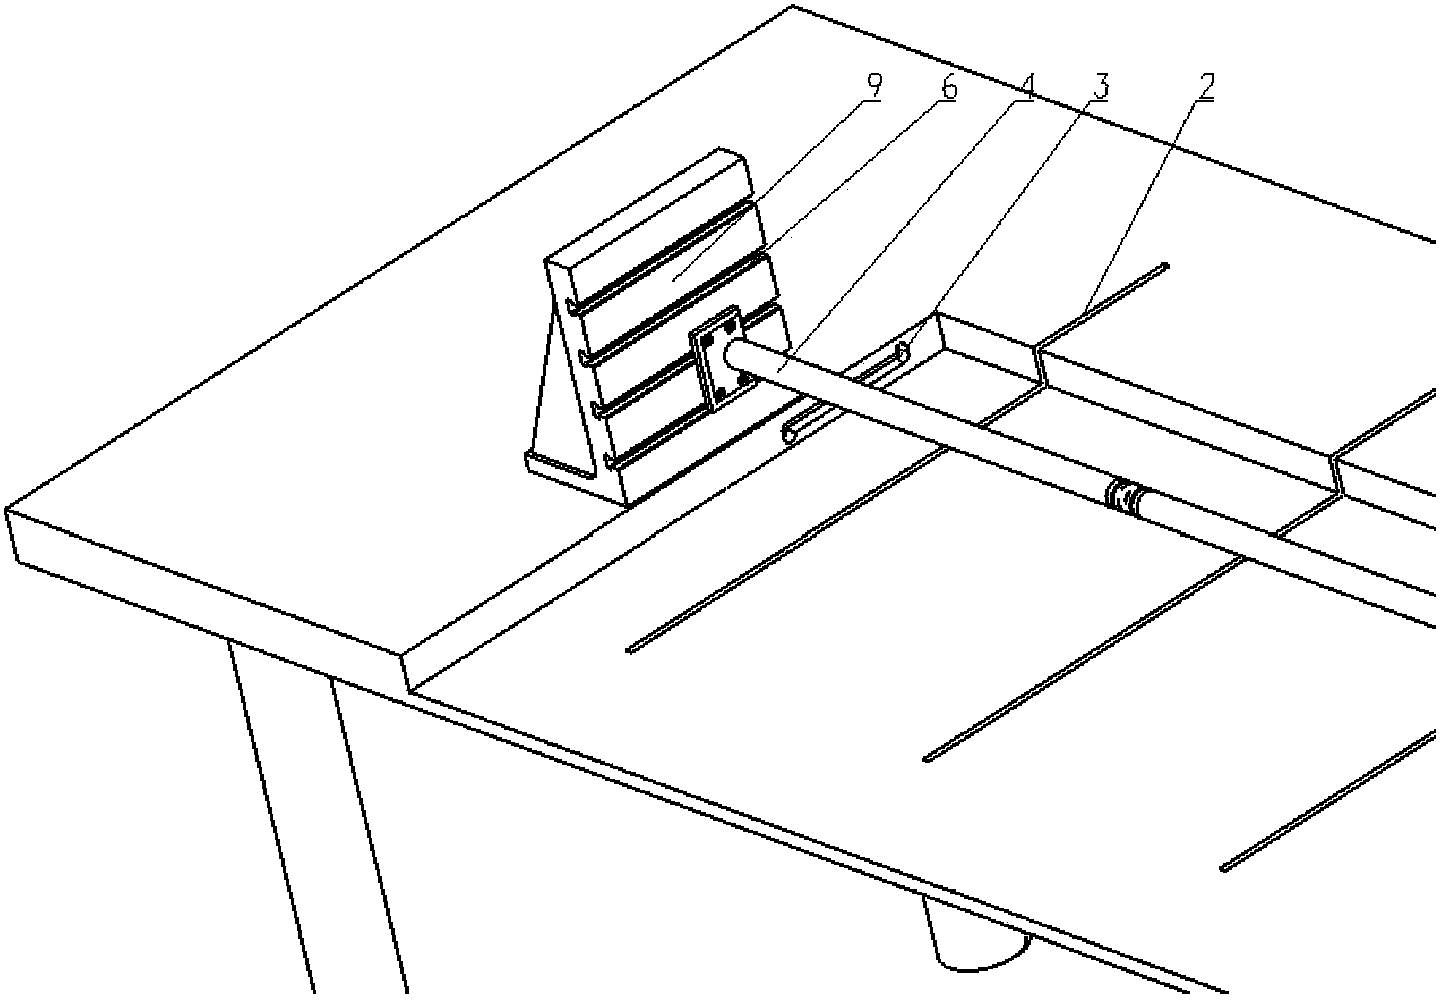 Curve or distortion detection and prestressing force infliction experiment table for composite material C-type beam